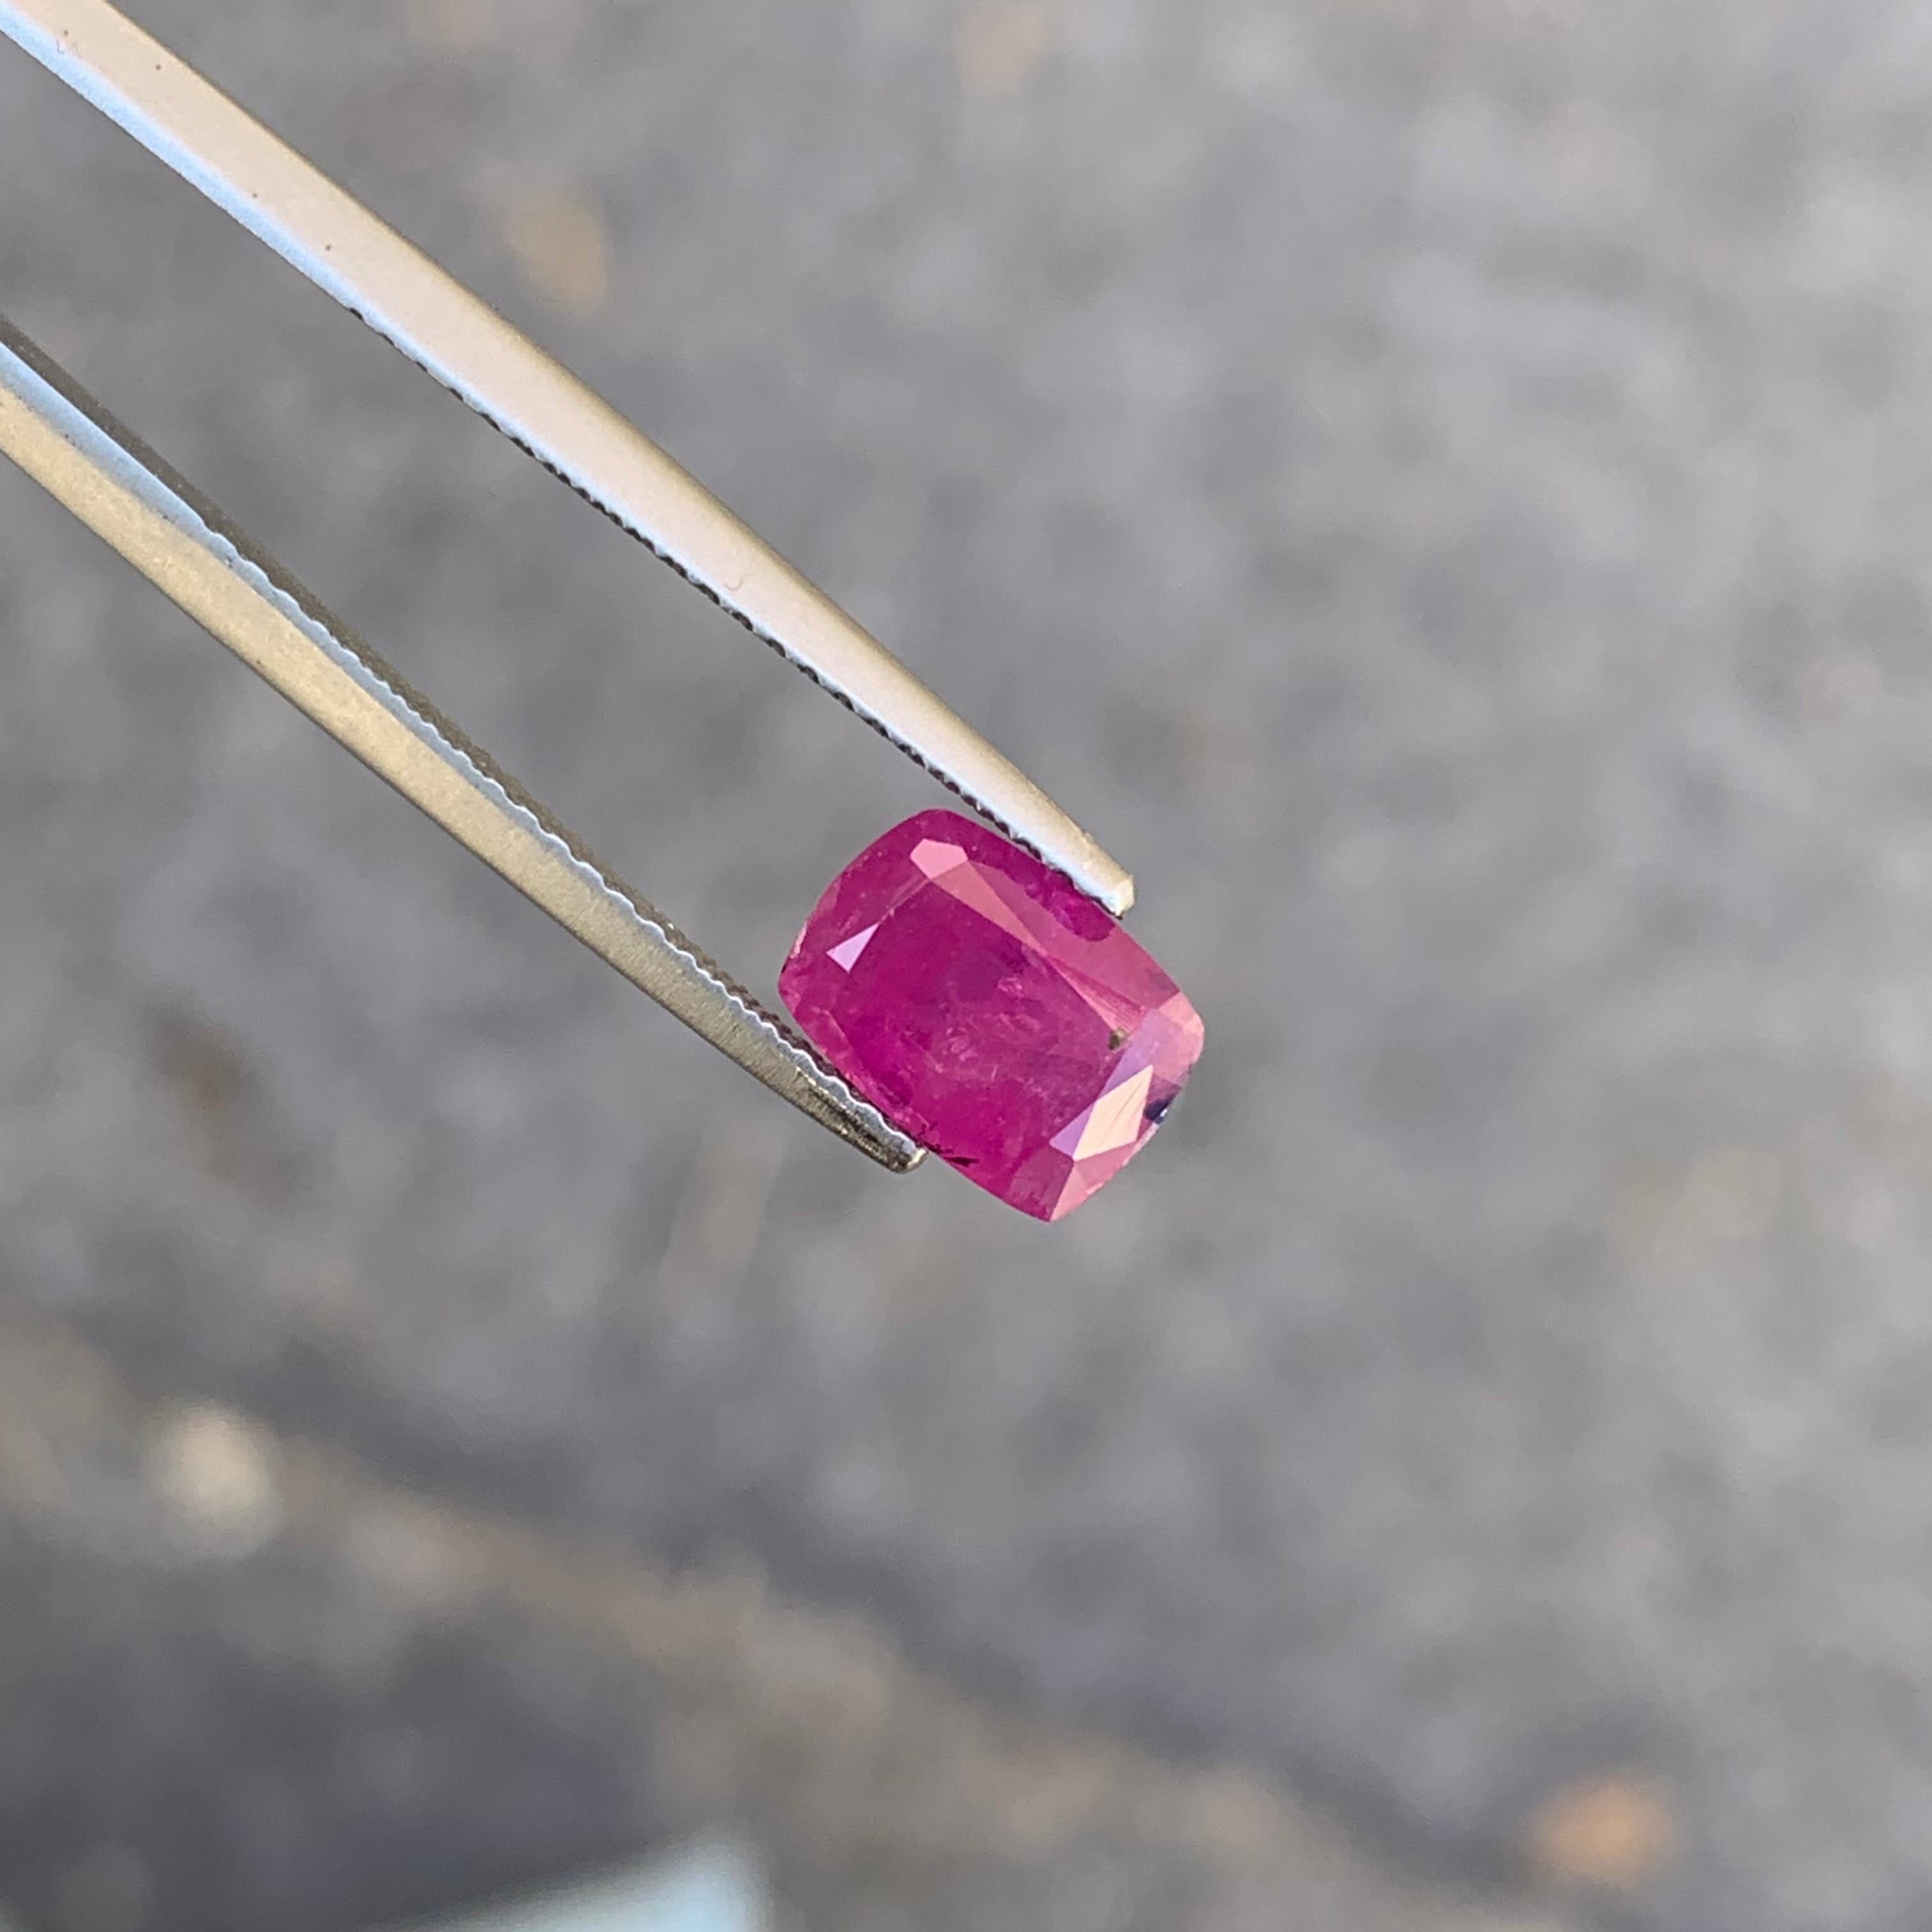 Certified 1.65 Carat Natural Loose Ruby Corundum From Afghan Mine Ring Gemstone For Sale 7